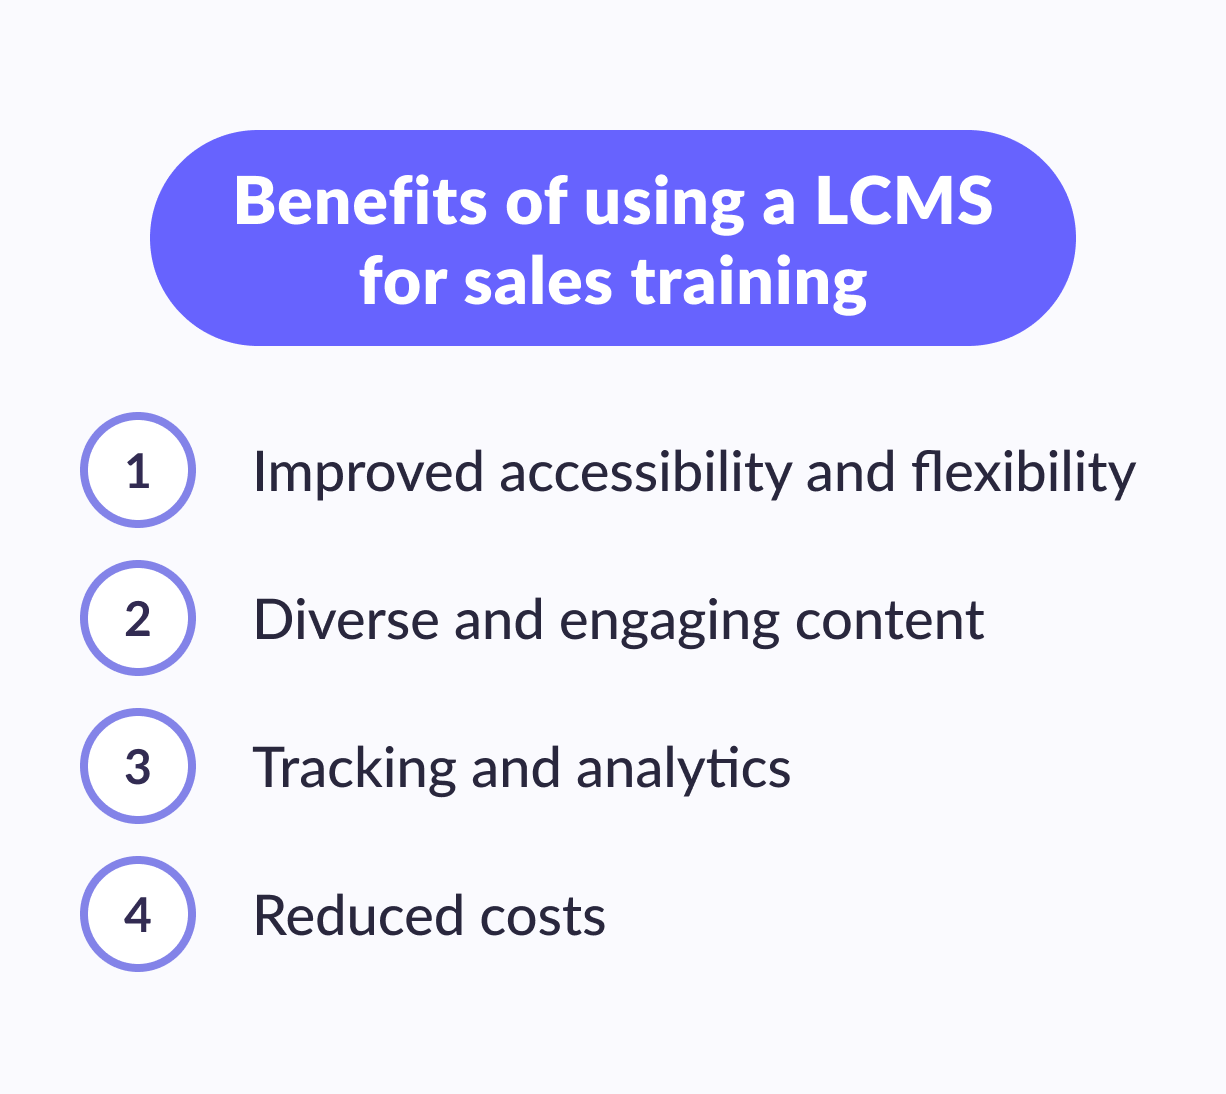 benefits of using a LCMS for sales training